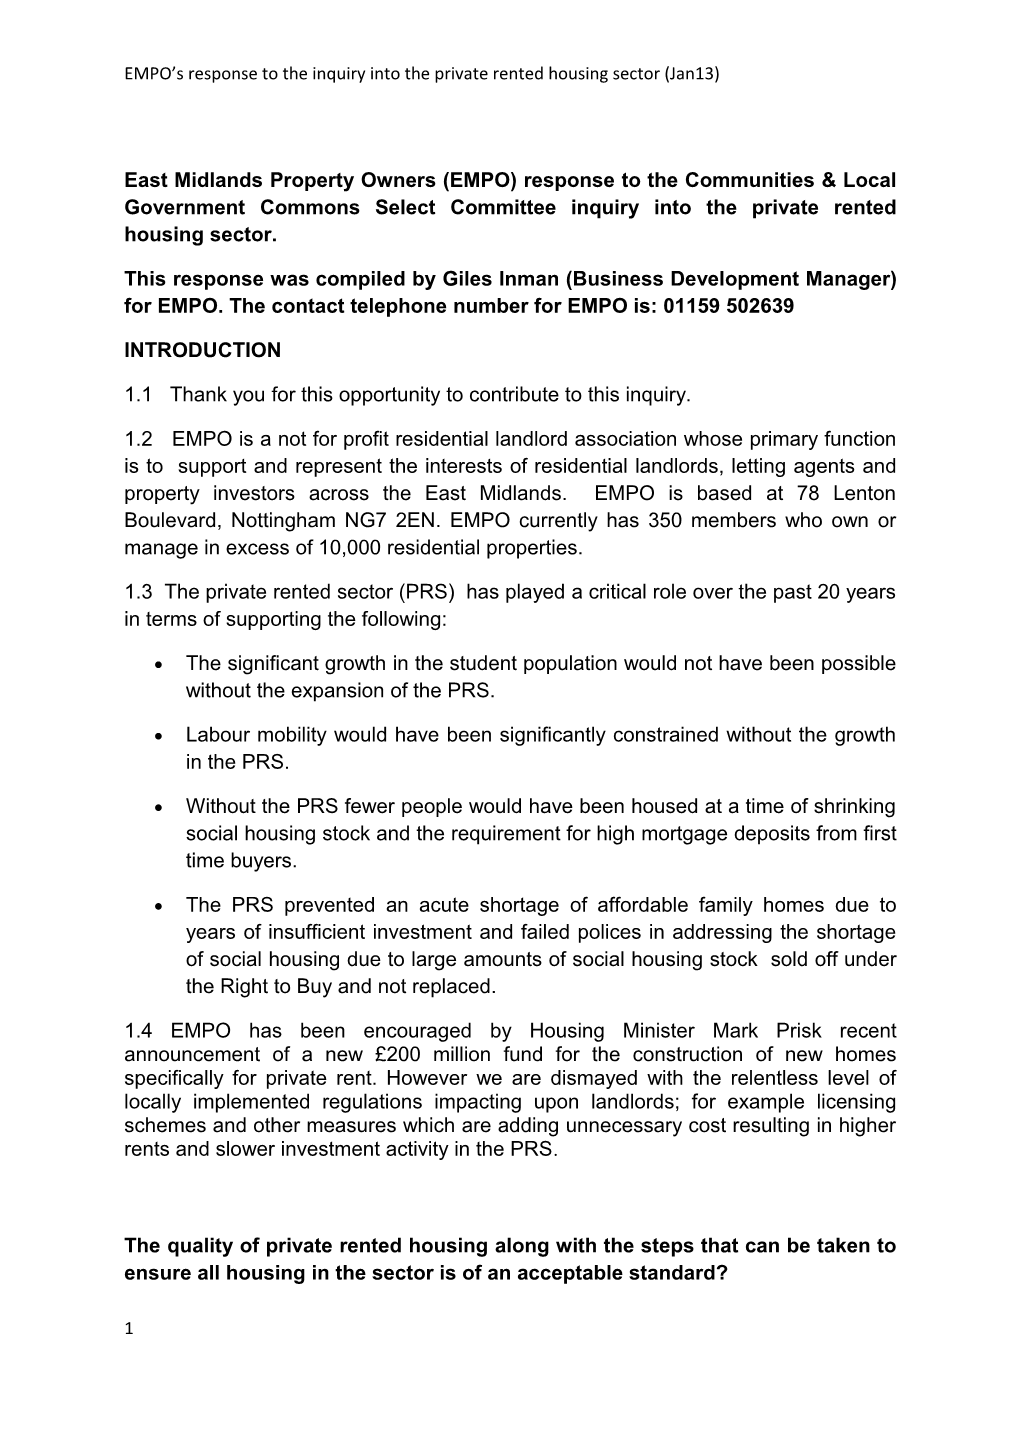 EMPO S Response to the Inquiry Into the Private Rented Housing Sector (Jan13)